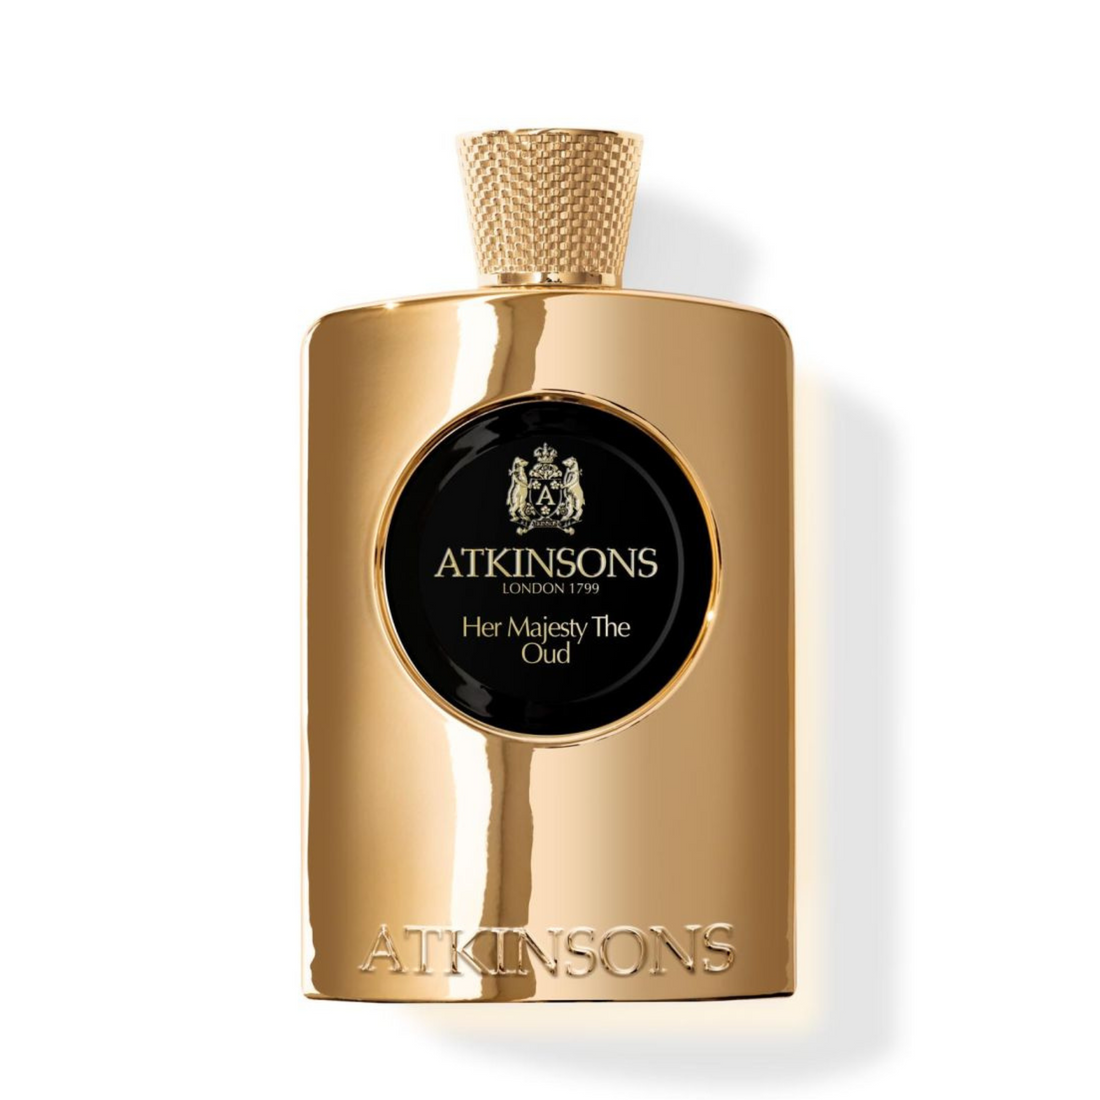 ATKINSONS HER MAJESTY THE OUD EDP